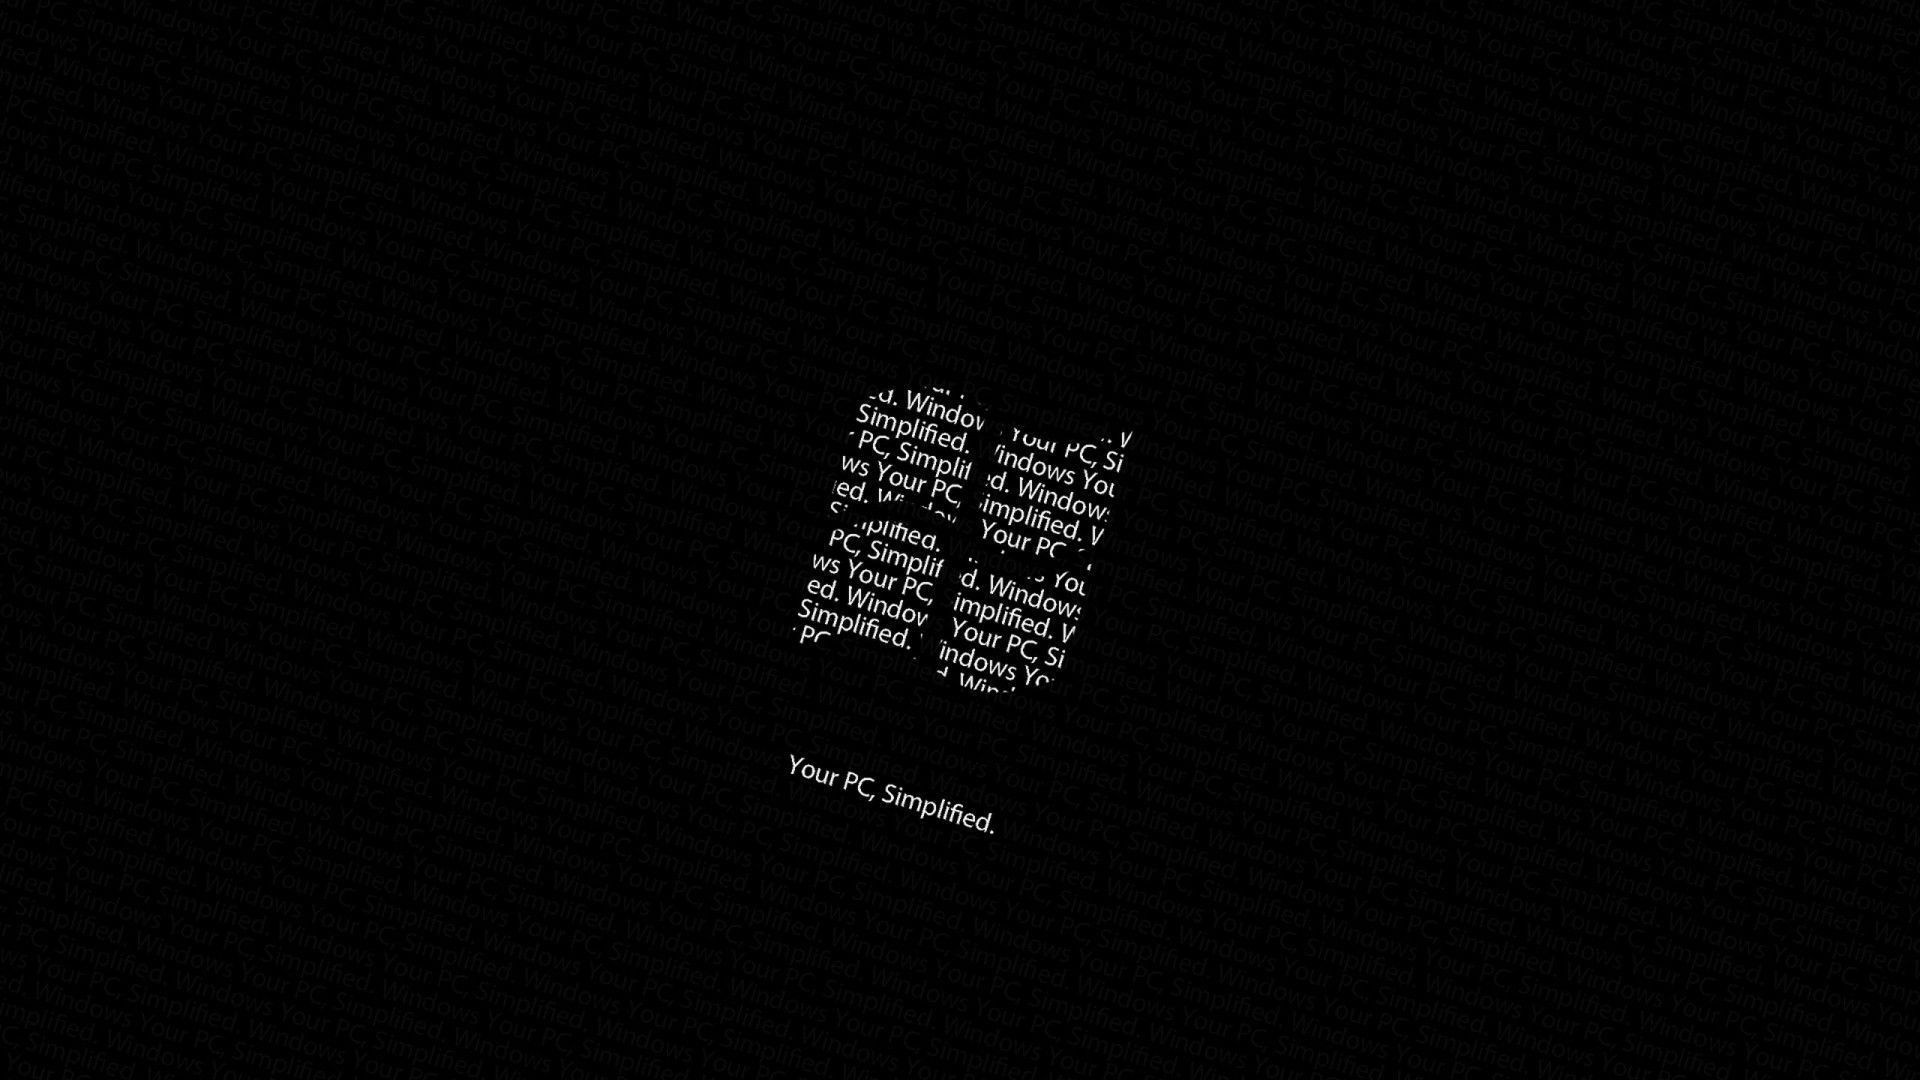 Dark Aesthetic Quotes Wallpapers